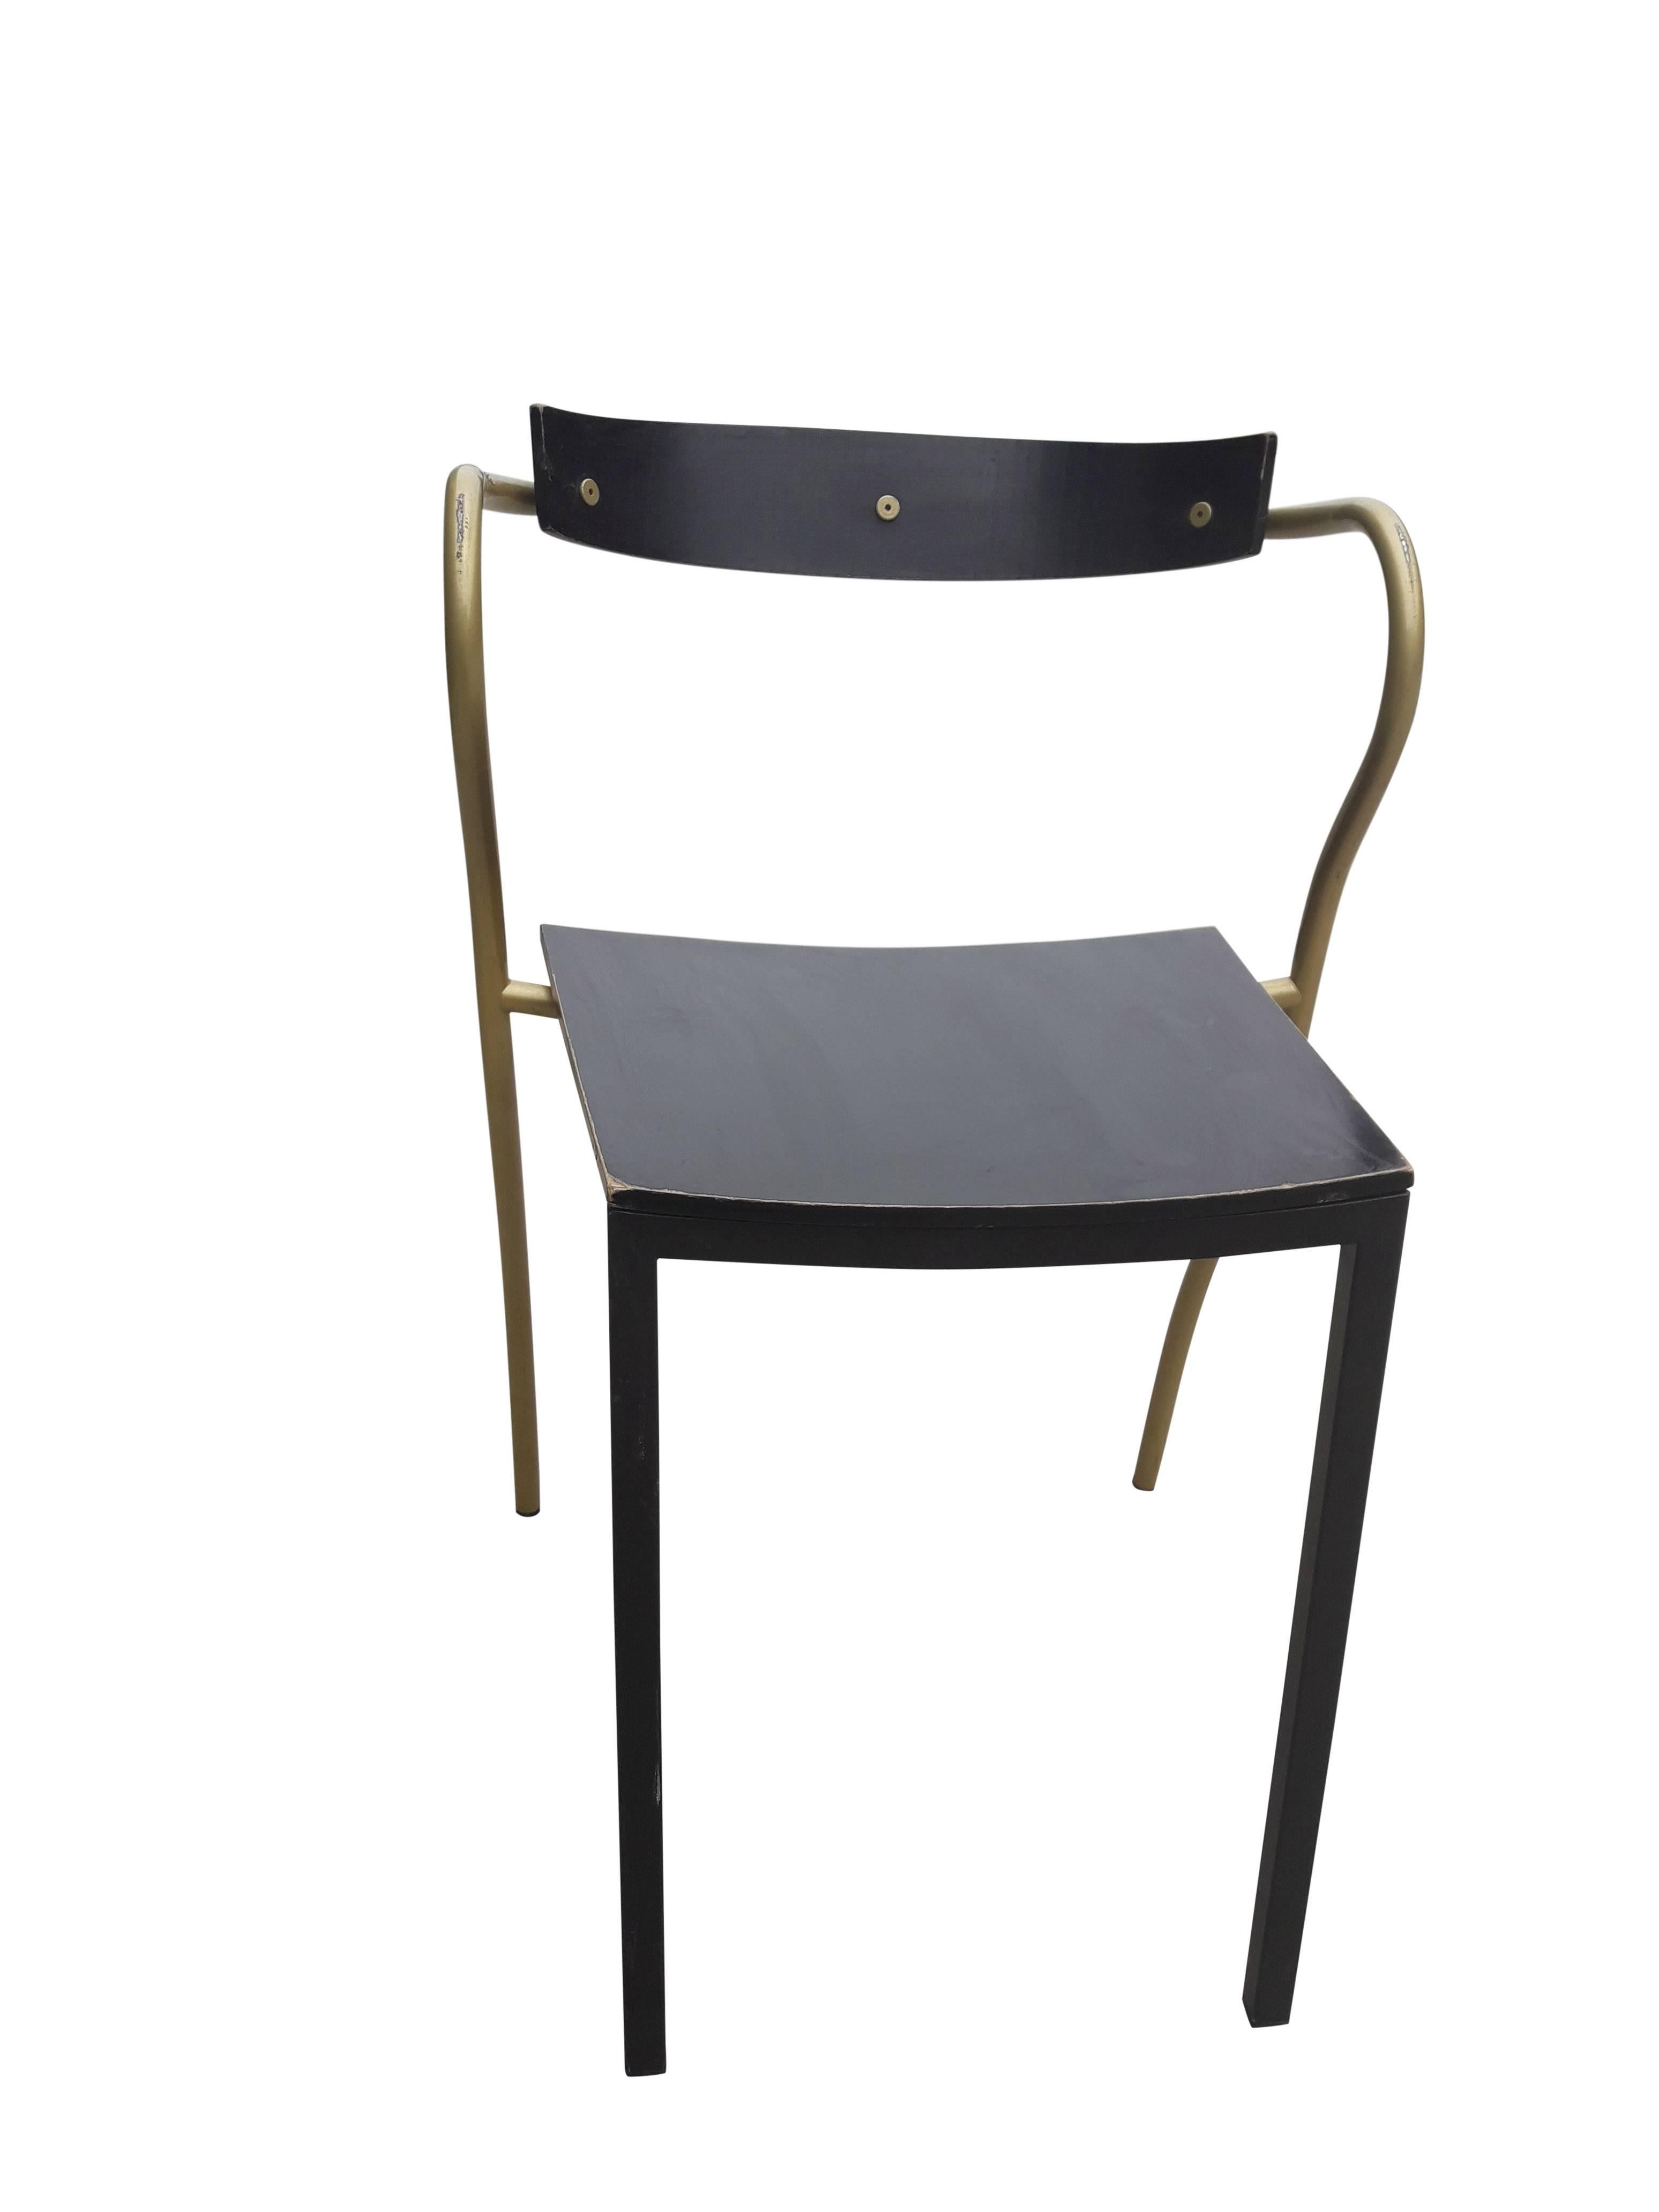 French Rio Chair by Pascal Mourgue for Artelano, 1991 Mid-Century Modern For Sale